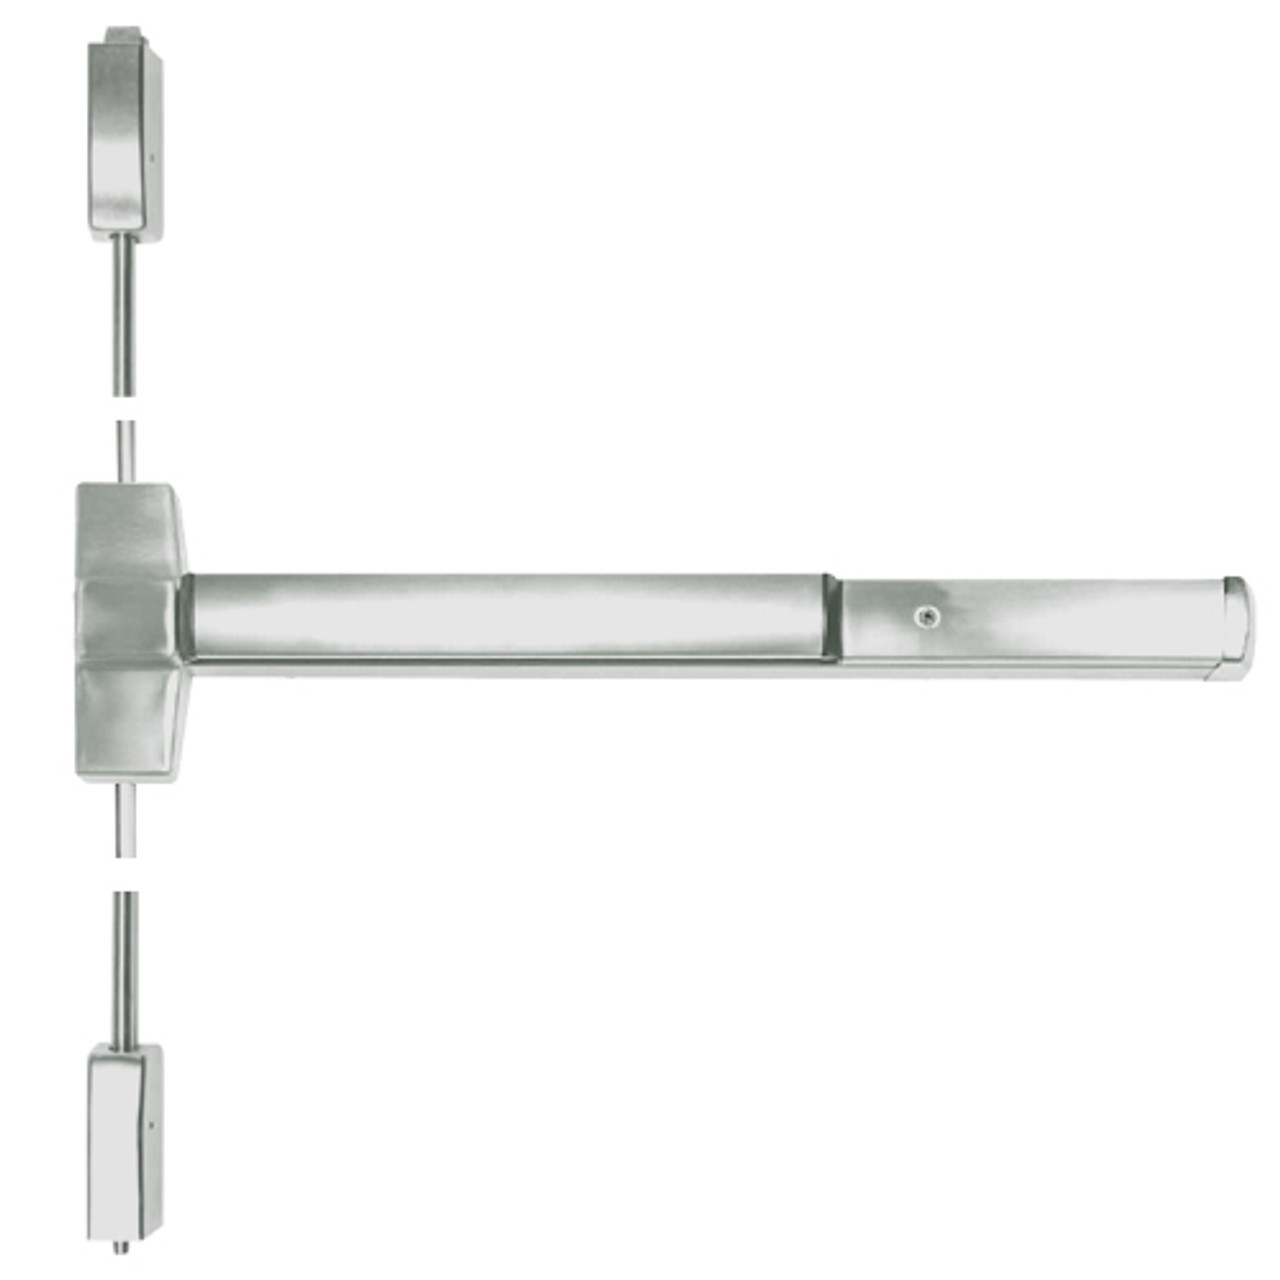 ED5400-619 Corbin ED5400 Series Non Fire Rated Vertical Rod Exit Device in Satin Nickel Finish